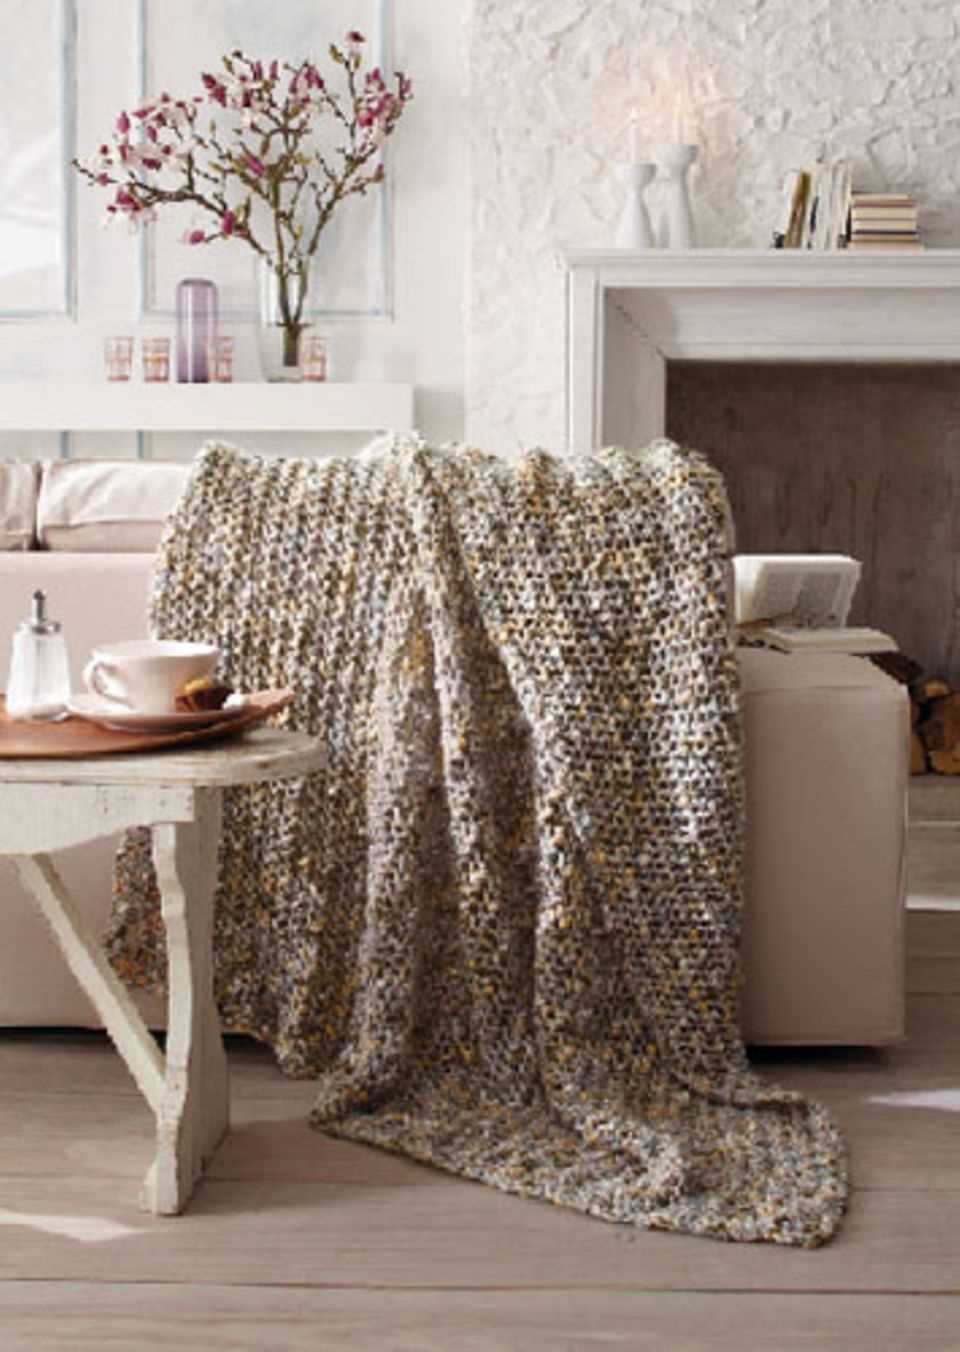 Knit blanket: 10 simple instructions